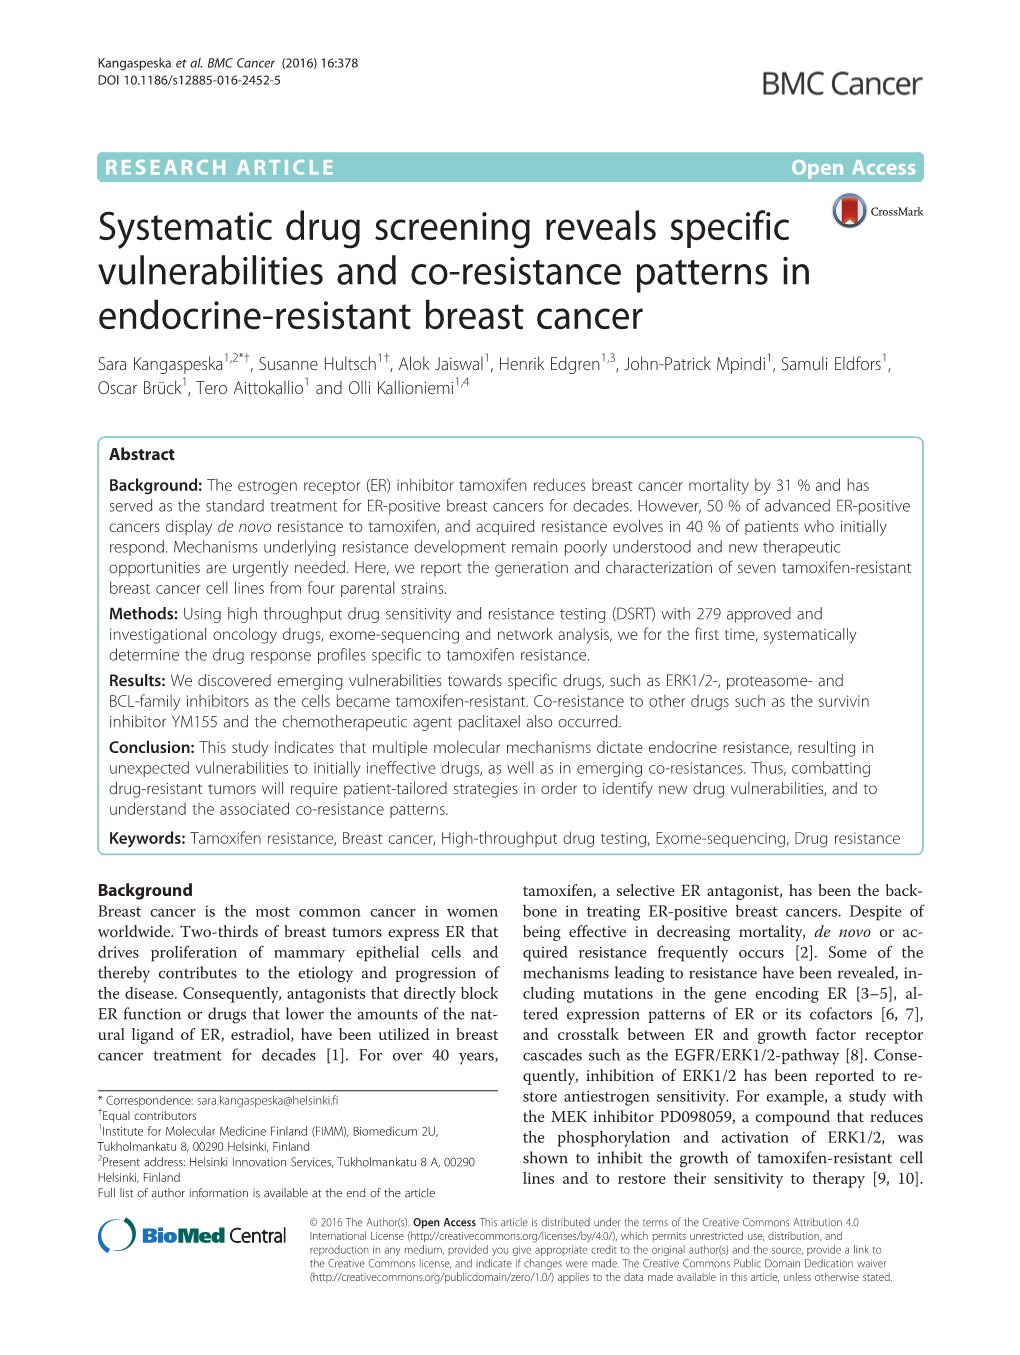 Systematic Drug Screening Reveals Specific Vulnerabilities and Co